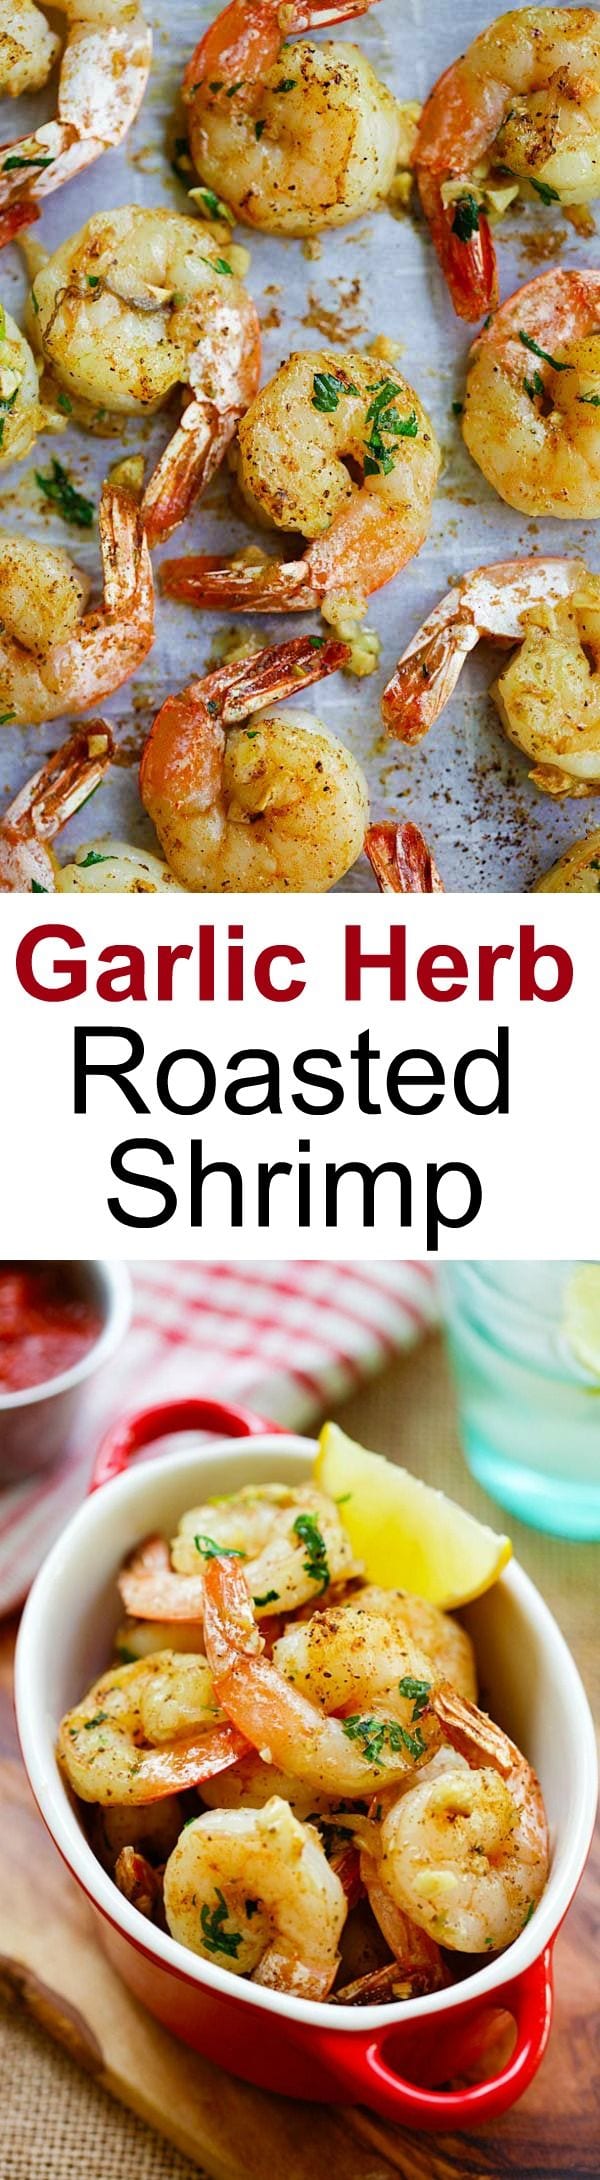 Garlic Herb Roasted Shrimp - easiest  and best roasted shrimp with butter, garlic, herb and serve with cocktail sauce. Takes 15 mins | rasamalaysia.com